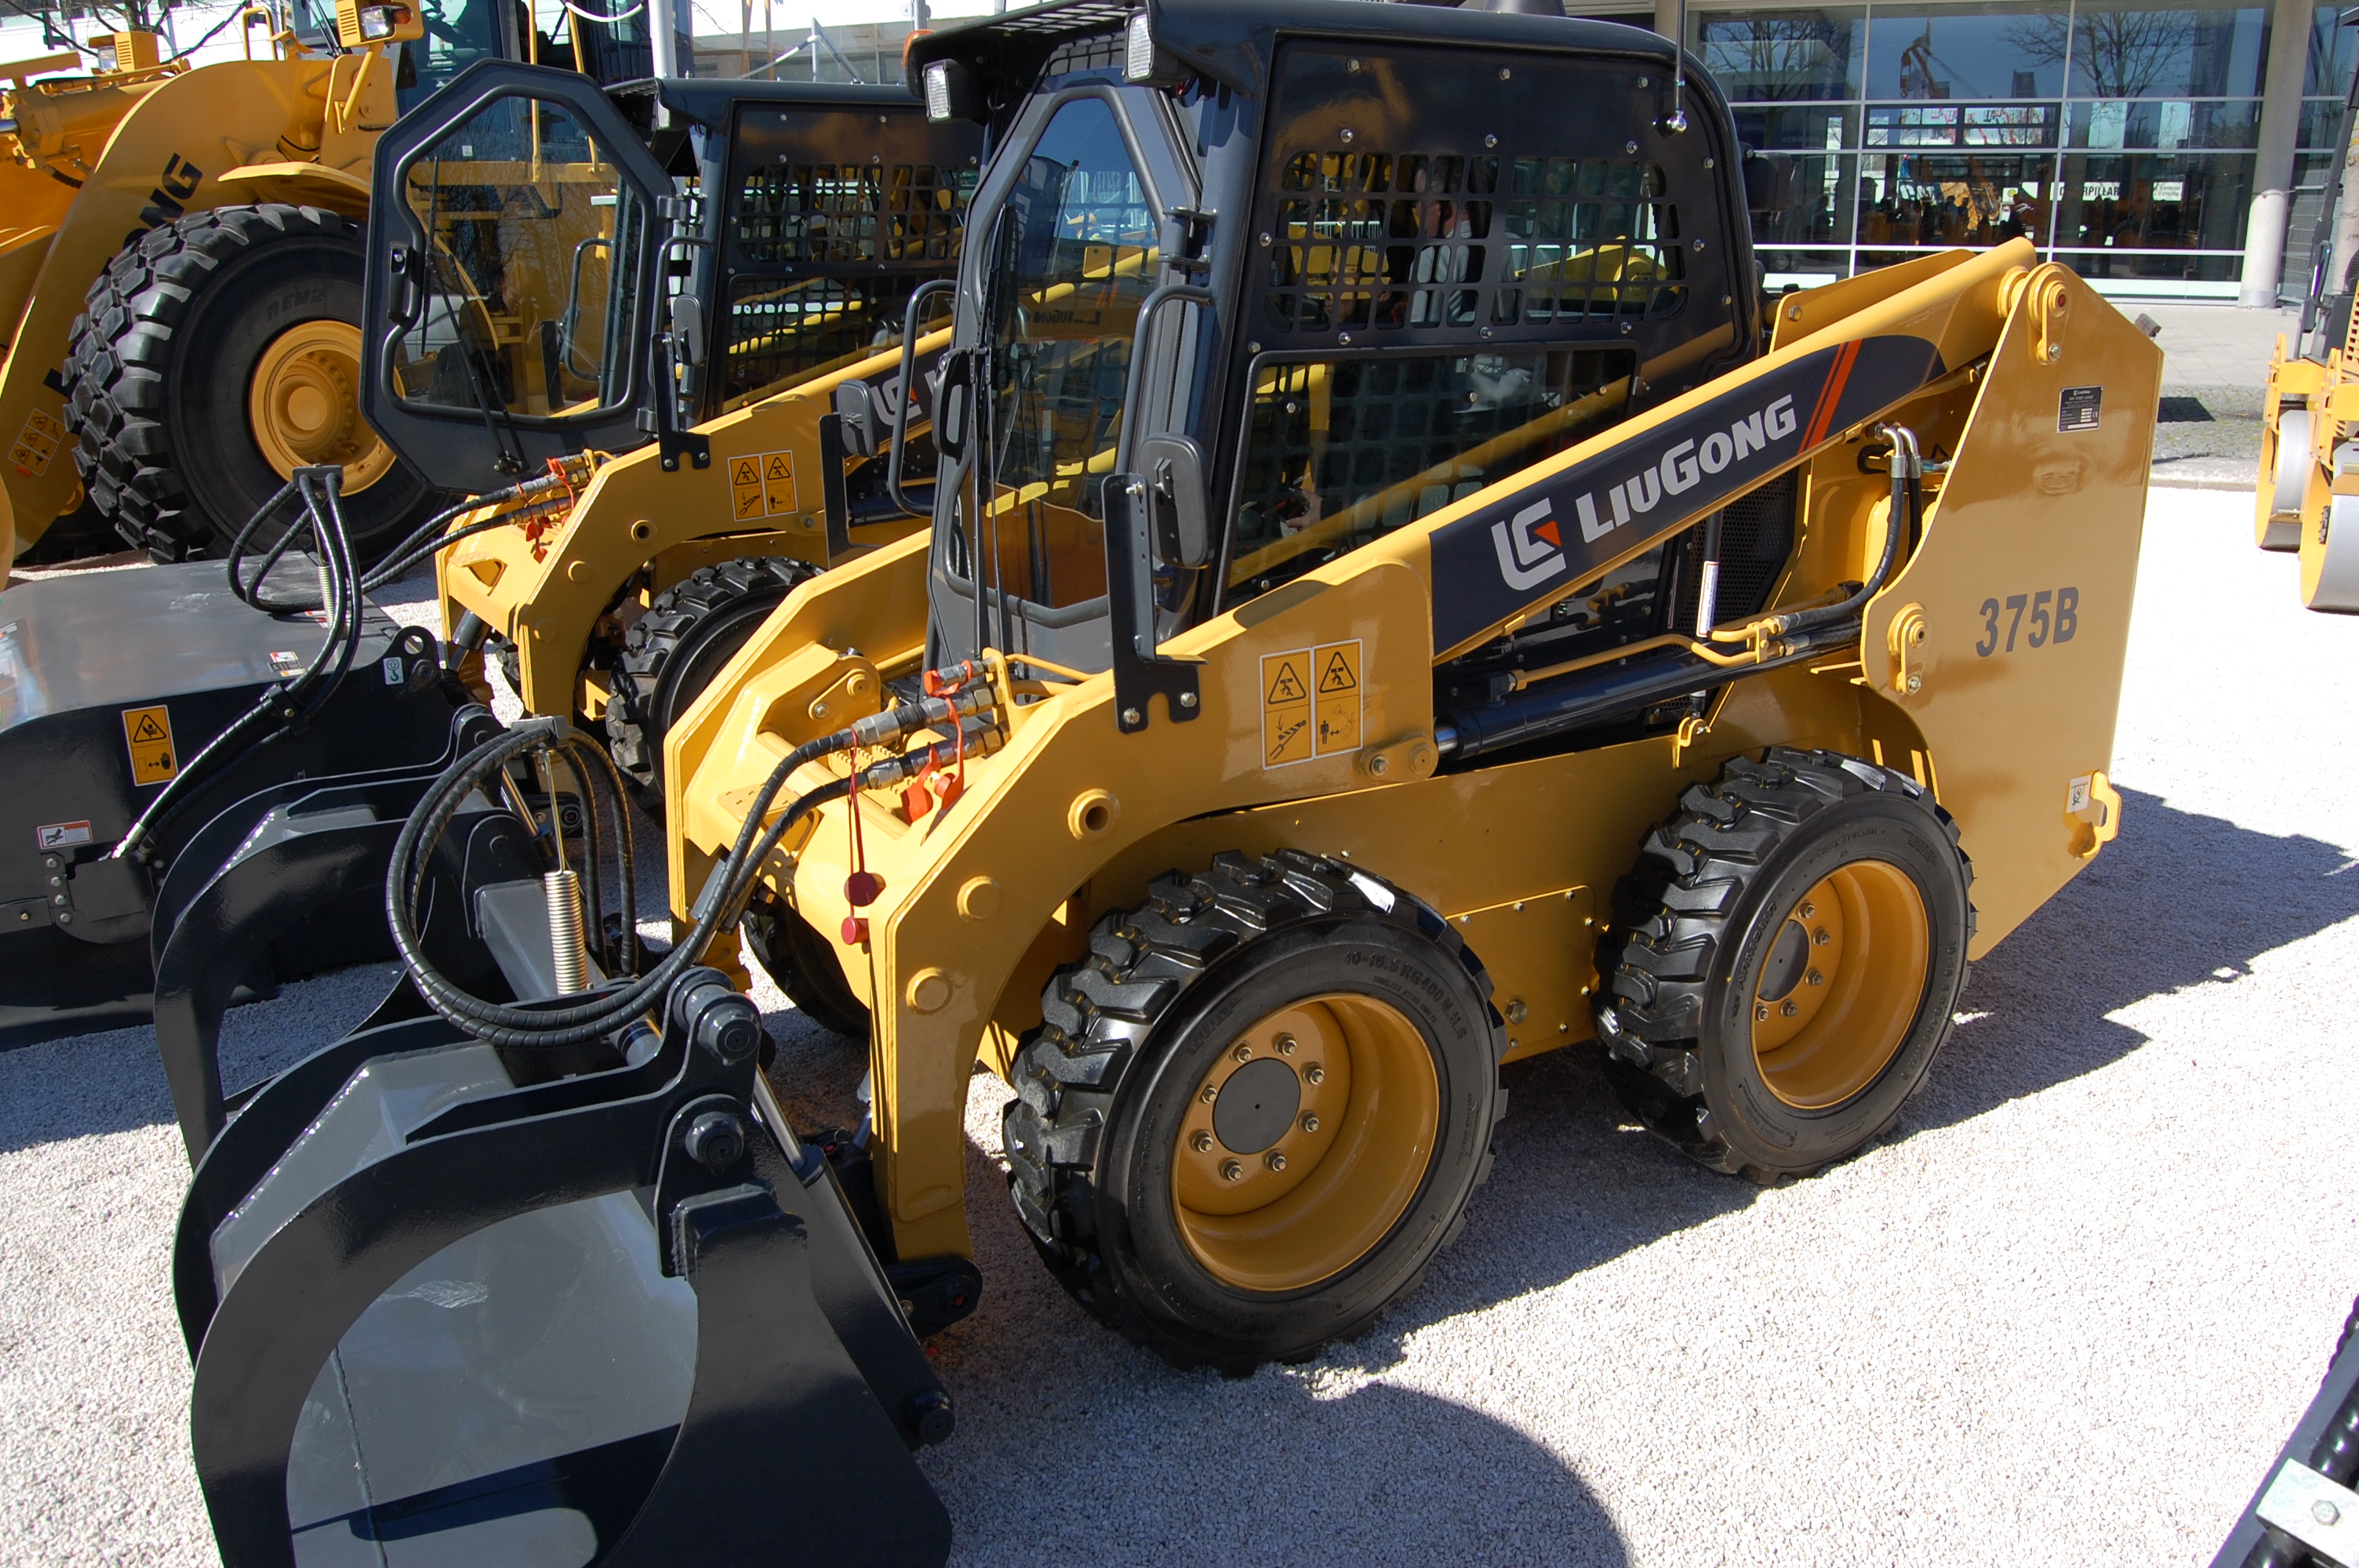 Amazing LiuGong Skid Steer Pictures & Backgrounds